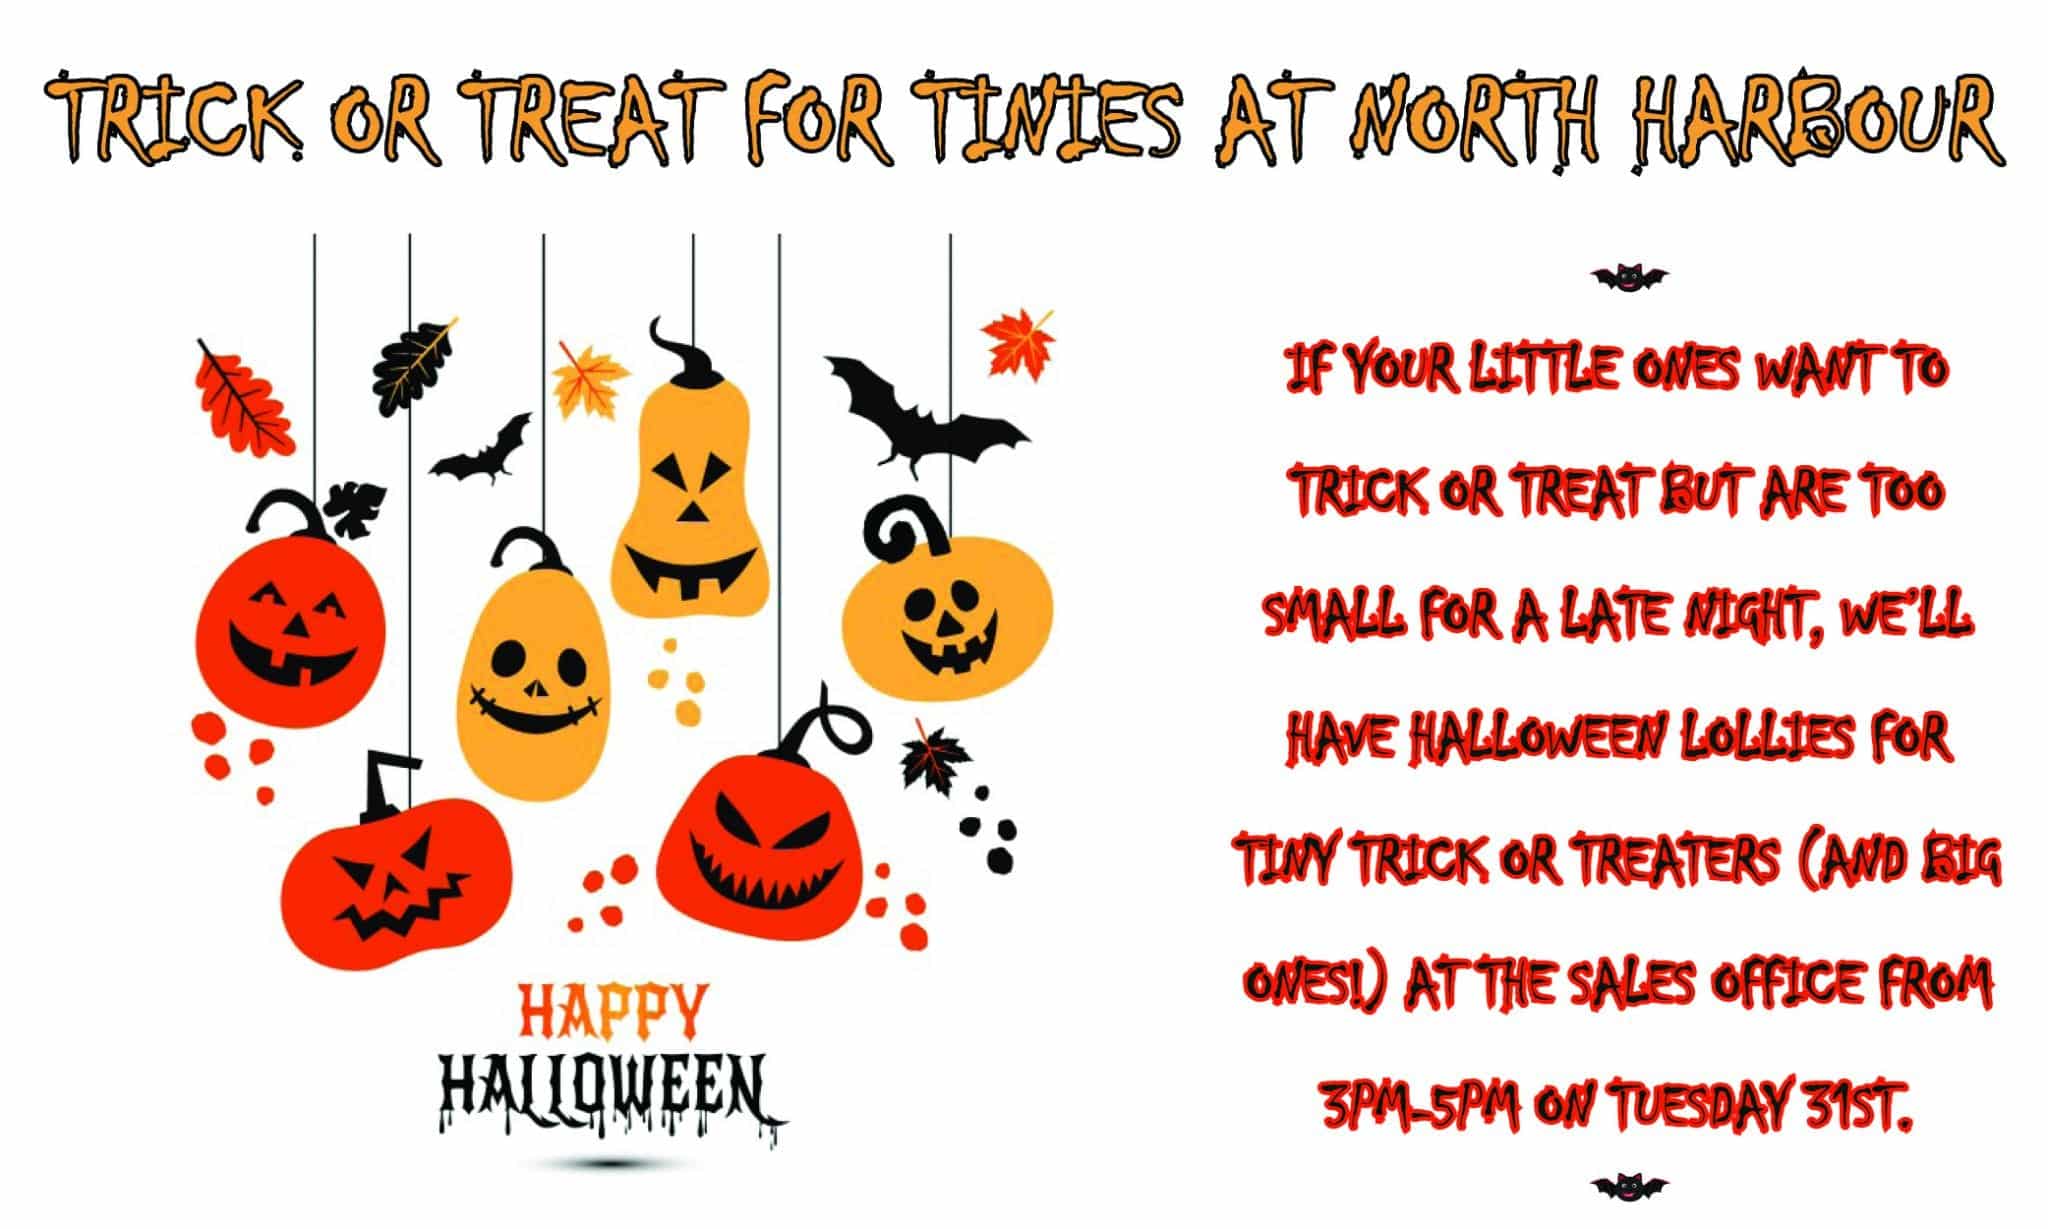 Trick or treat at North Harbour